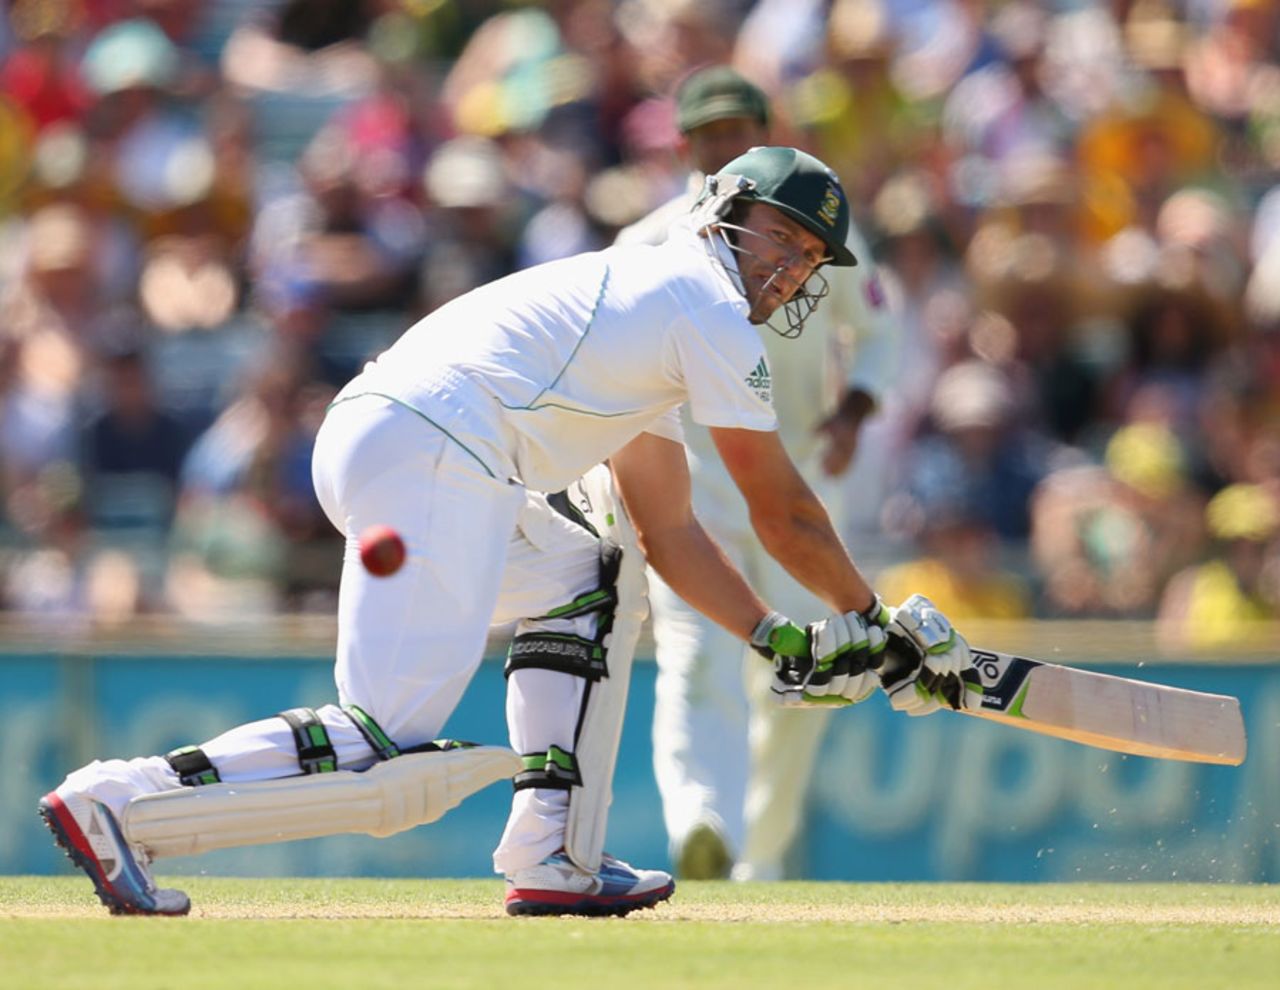 AB de Villiers reached his century with three successive reverse-sweeps, Australia v South Africa, third Test, 3rd day, Perth, December 2, 2012